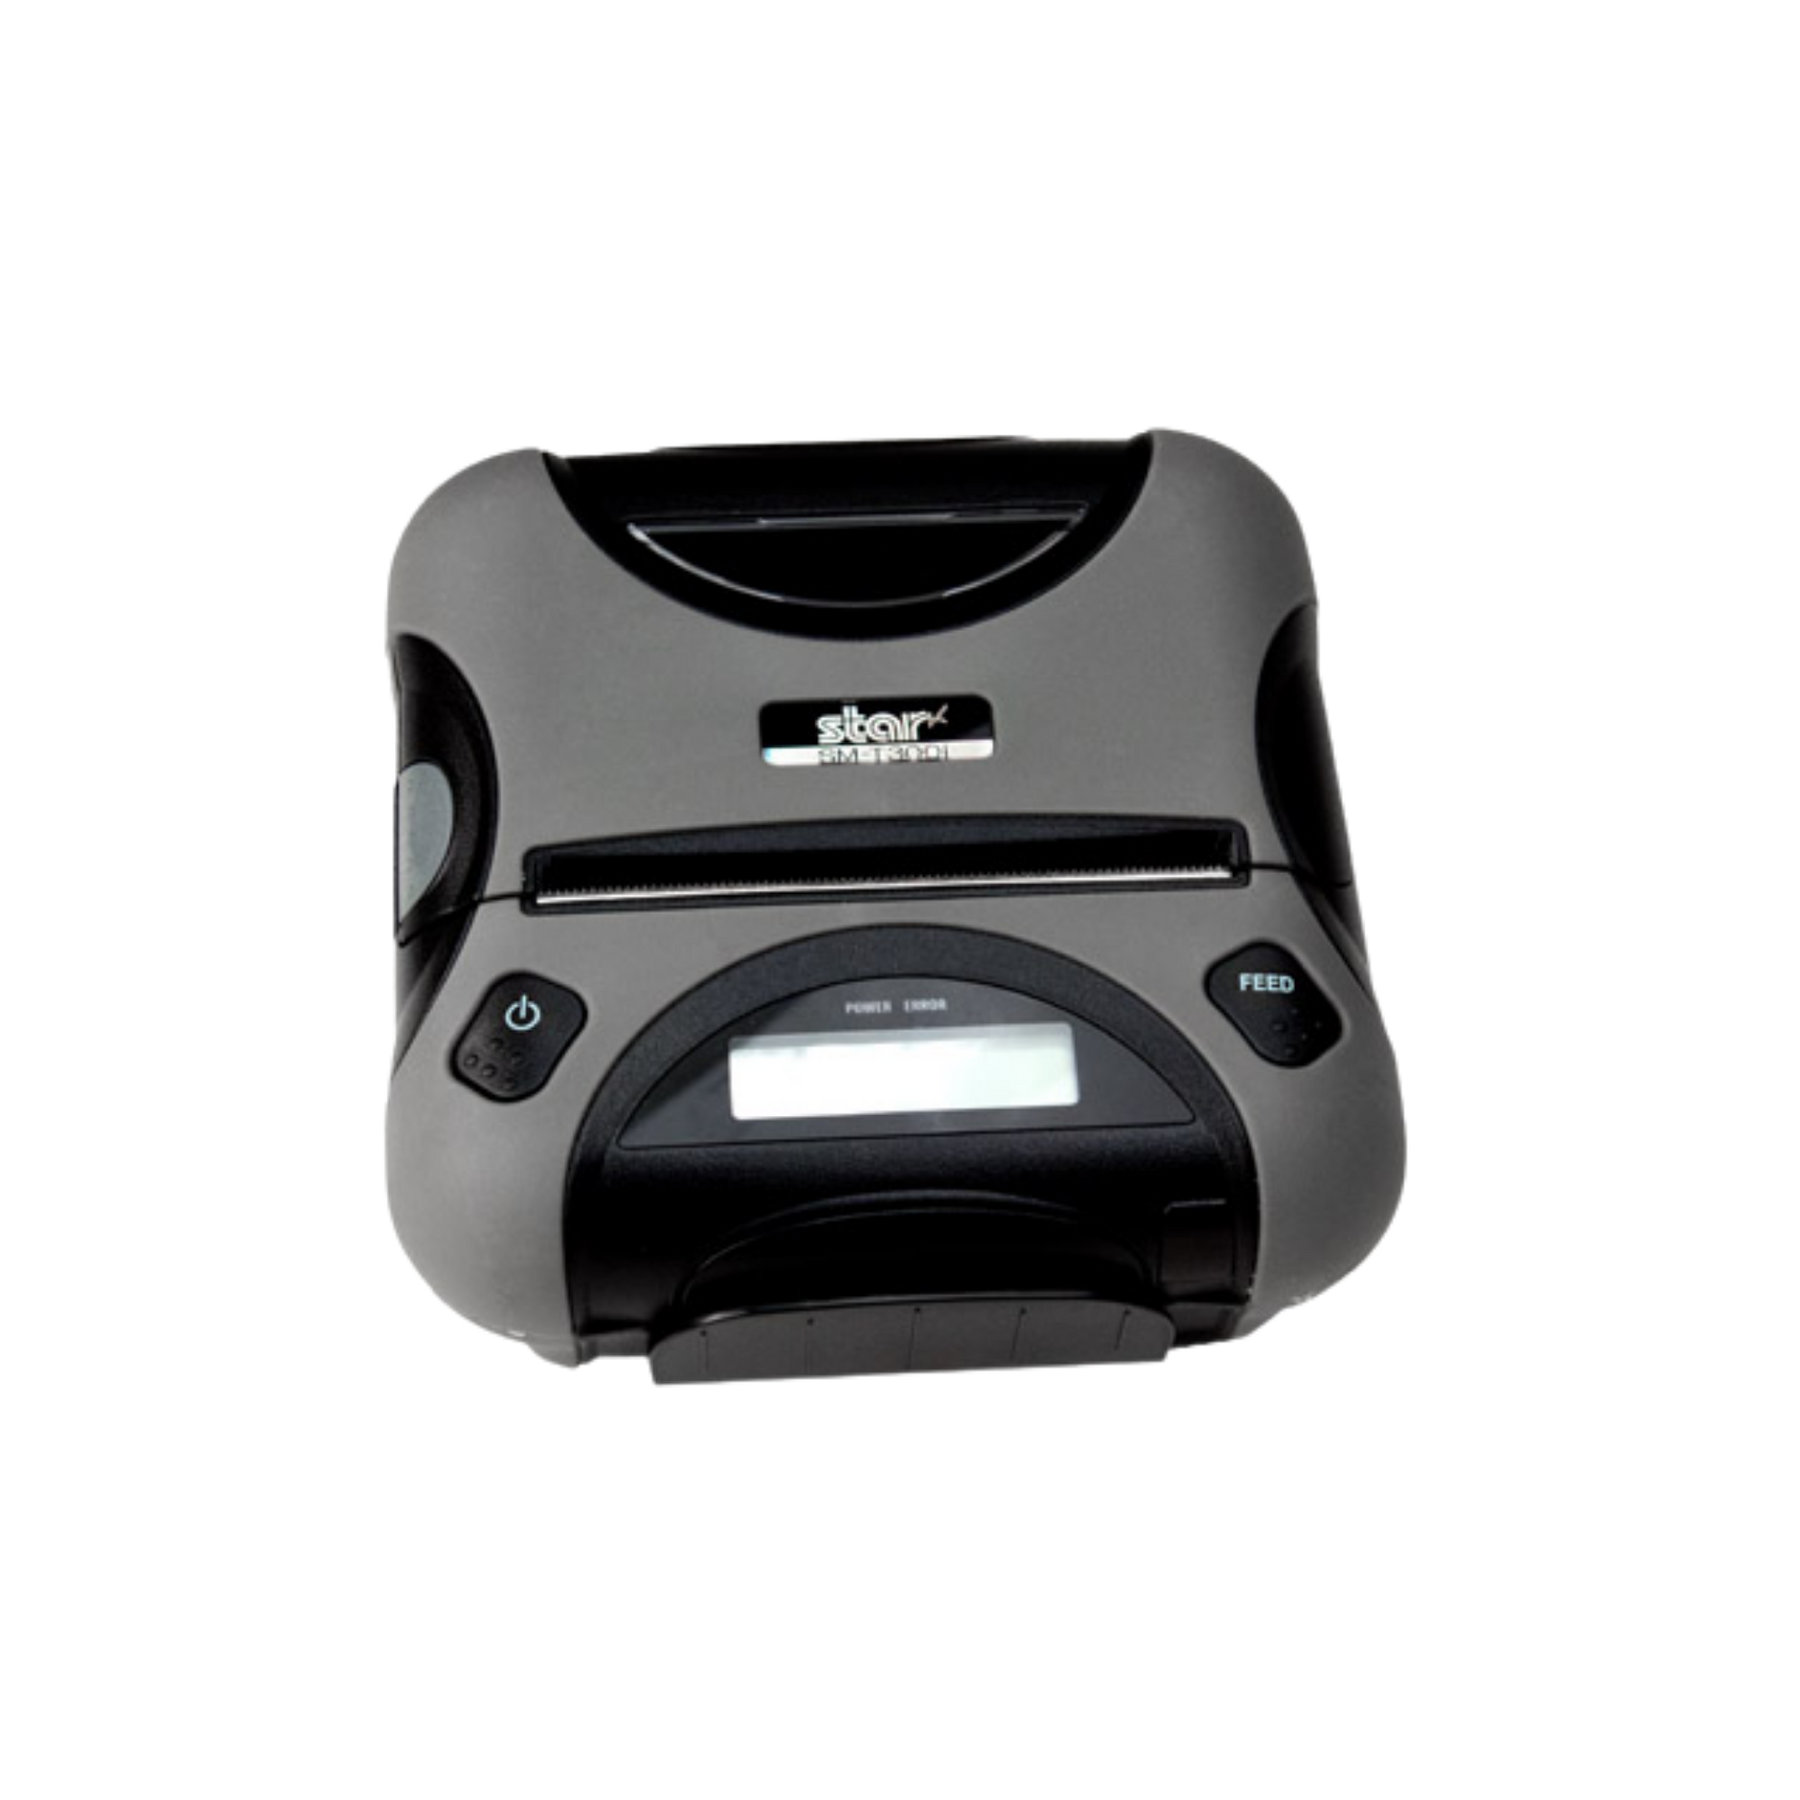 Star Micronics, Sm-T300i Series, Mobile Thermal Receipt Printer with Tear Bar, Bluetooth, Supports iOS, Android, Windows, No MSR, 39634010